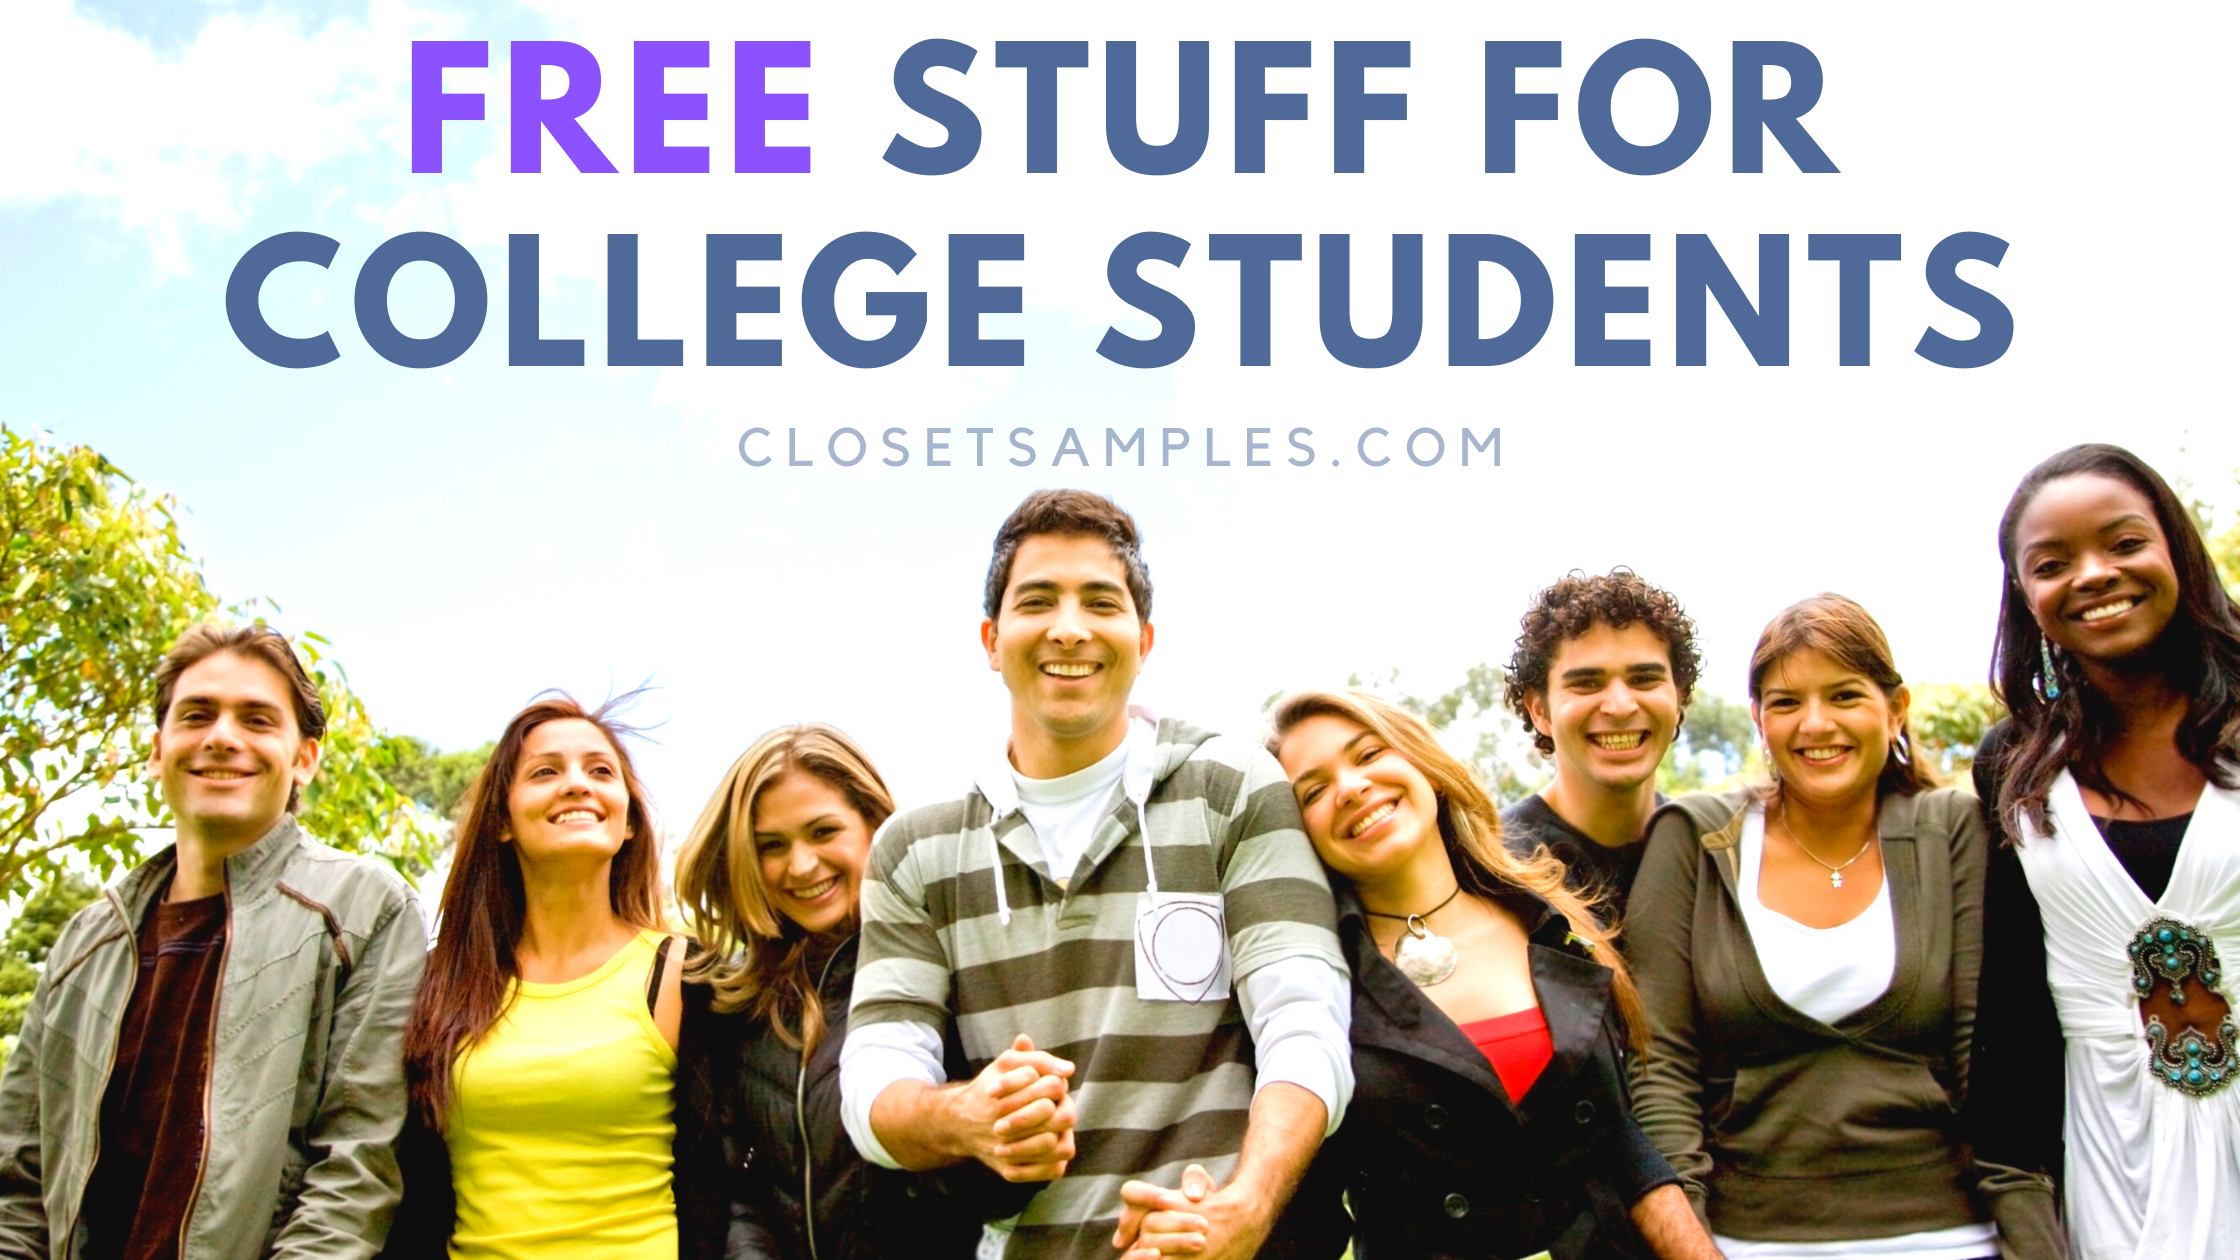 FREE Stuff for College Student...